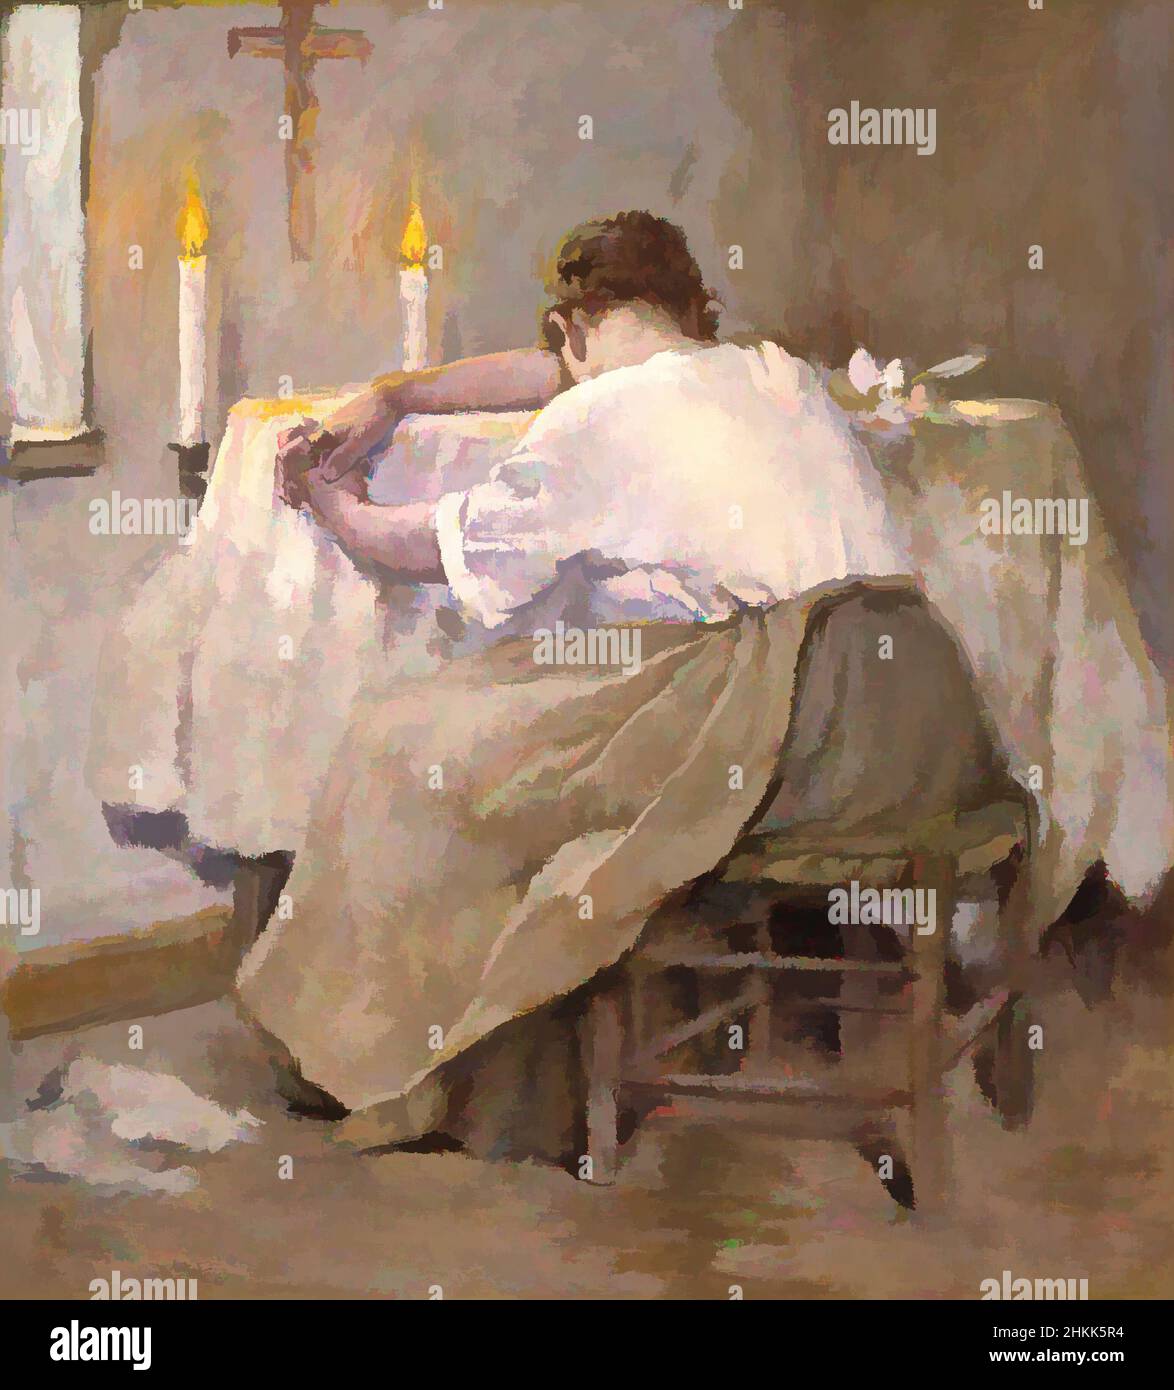 Art inspired by Her First Born, Robert Reid, American, 1862-1929, Oil on canvas, 1888, 37 x 33 5/8 in., 94 x 85.4 cm, 1888, American, American art, American Painting, apron, baby, candles, child, crib, cross, crucifix, crying, death, female, figure, infant, interior, mother, mourning, Classic works modernized by Artotop with a splash of modernity. Shapes, color and value, eye-catching visual impact on art. Emotions through freedom of artworks in a contemporary way. A timeless message pursuing a wildly creative new direction. Artists turning to the digital medium and creating the Artotop NFT Stock Photo